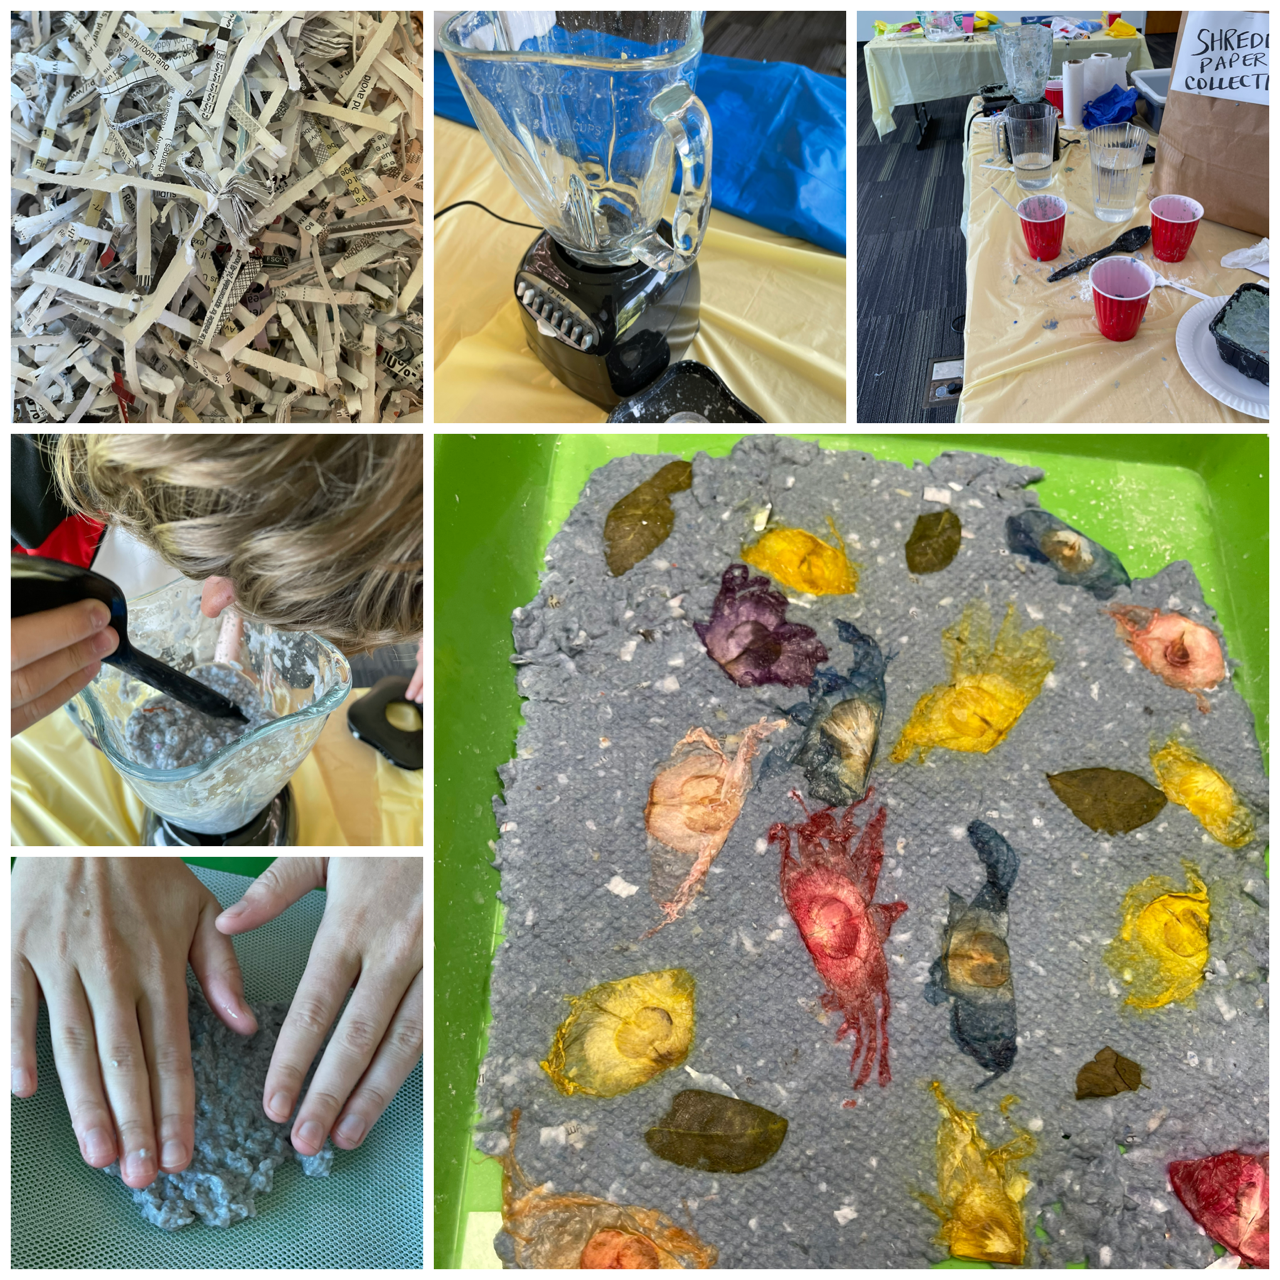 collage of pictures of the paper making process: shredded paper, blender, supplies, hands on pulp, spoon on pulp and finished paper with pressed flowers